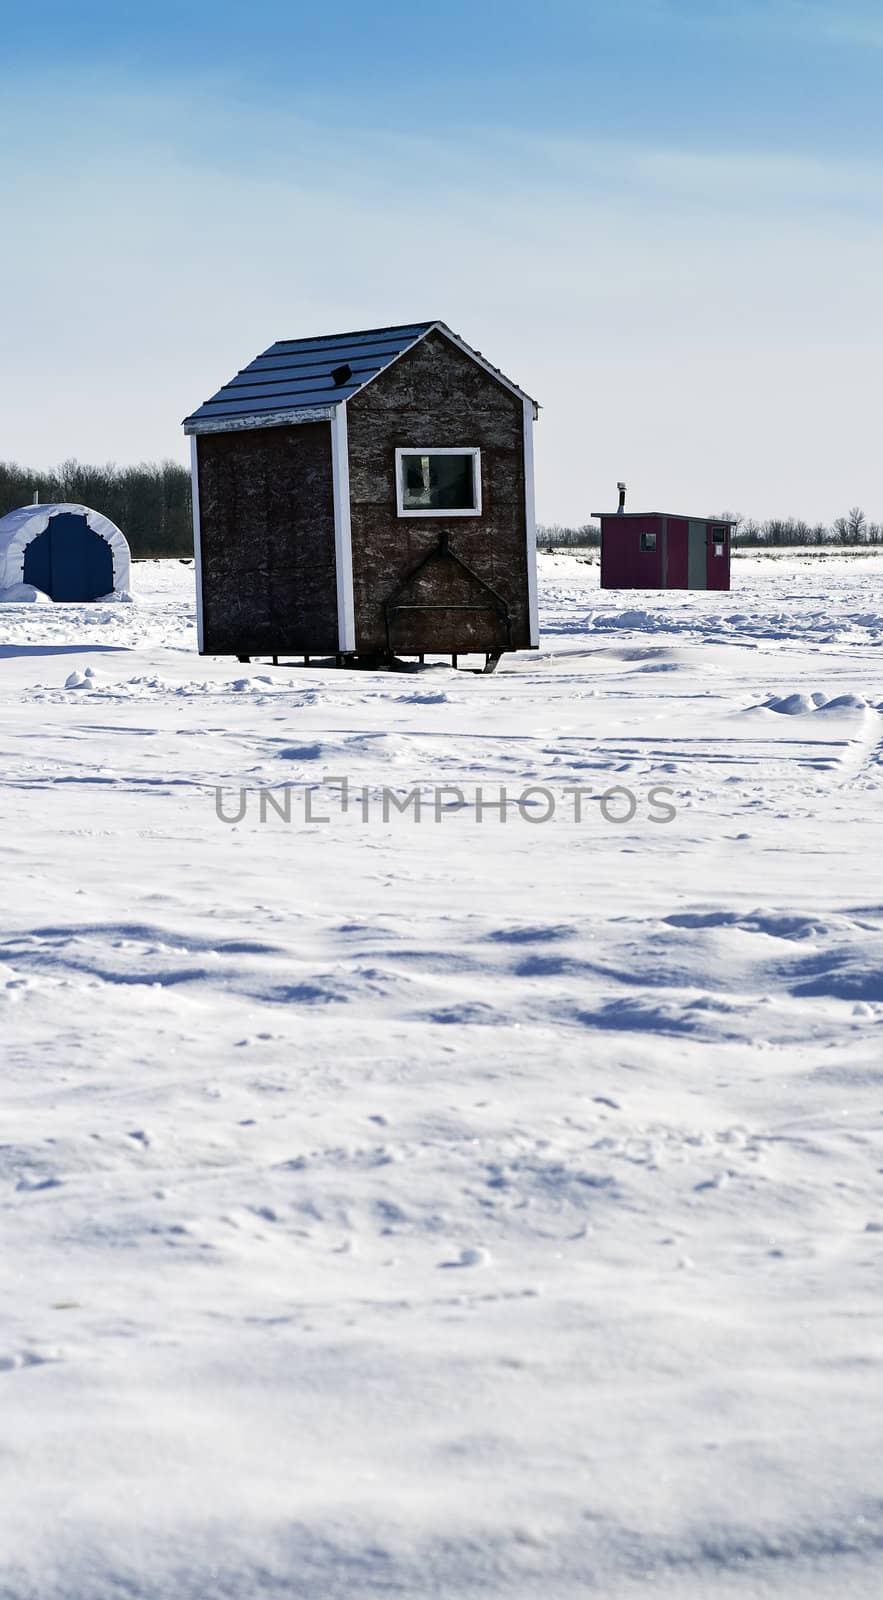 Scattered shacks used for ice fishing situated on the frozen "Red River" in Manitoba.